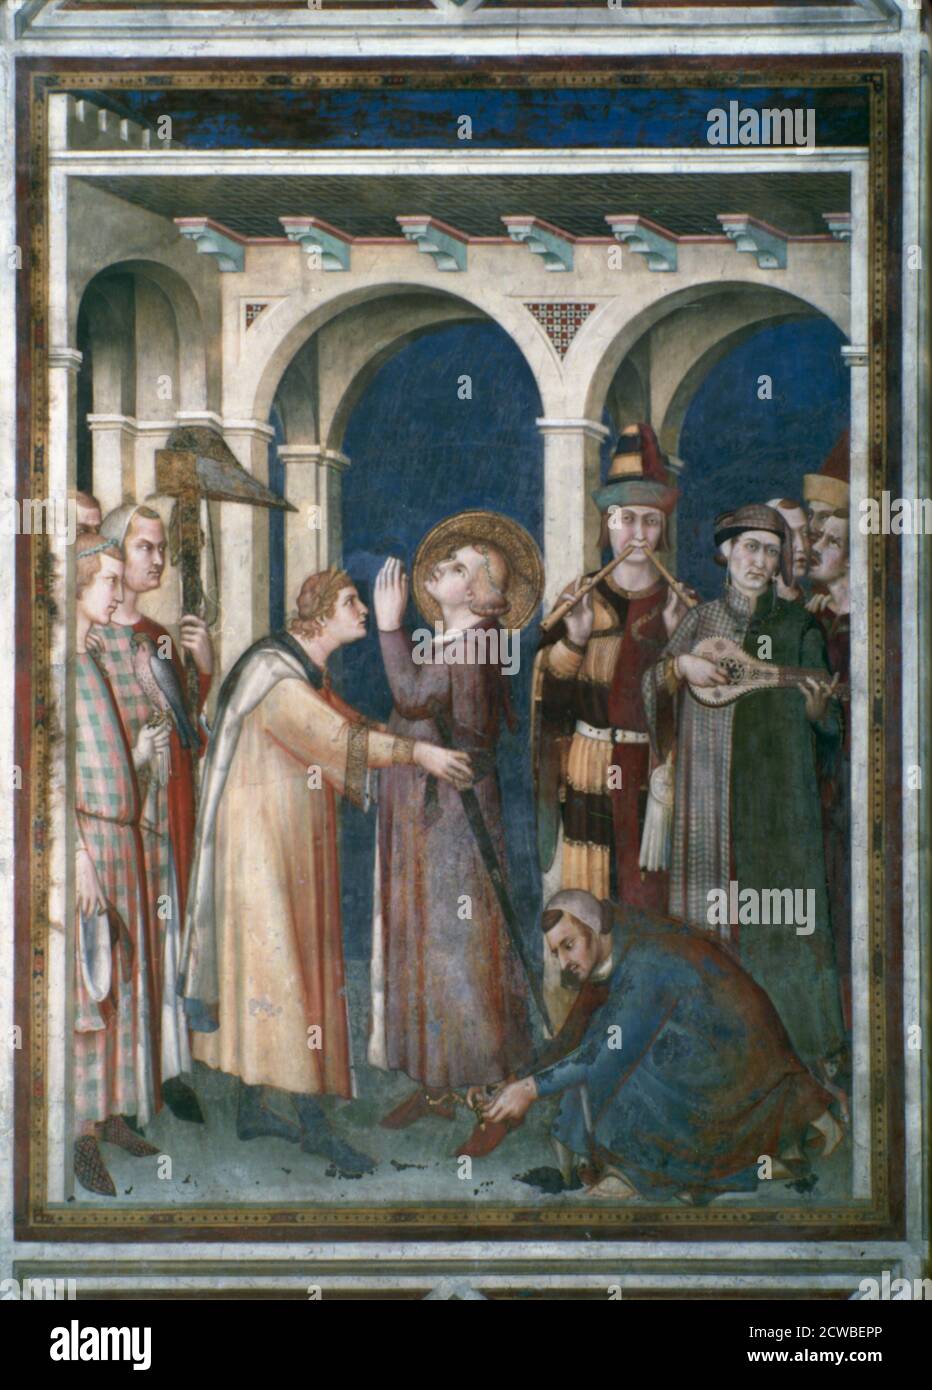 St Martin is Knighted', 1312-1317. Artist: Simone Martini. Simone Martini was an Italian painter born in Siena. He was a major figure in the development of early Italian painting and greatly influenced the development of the International Gothic style. Stock Photo